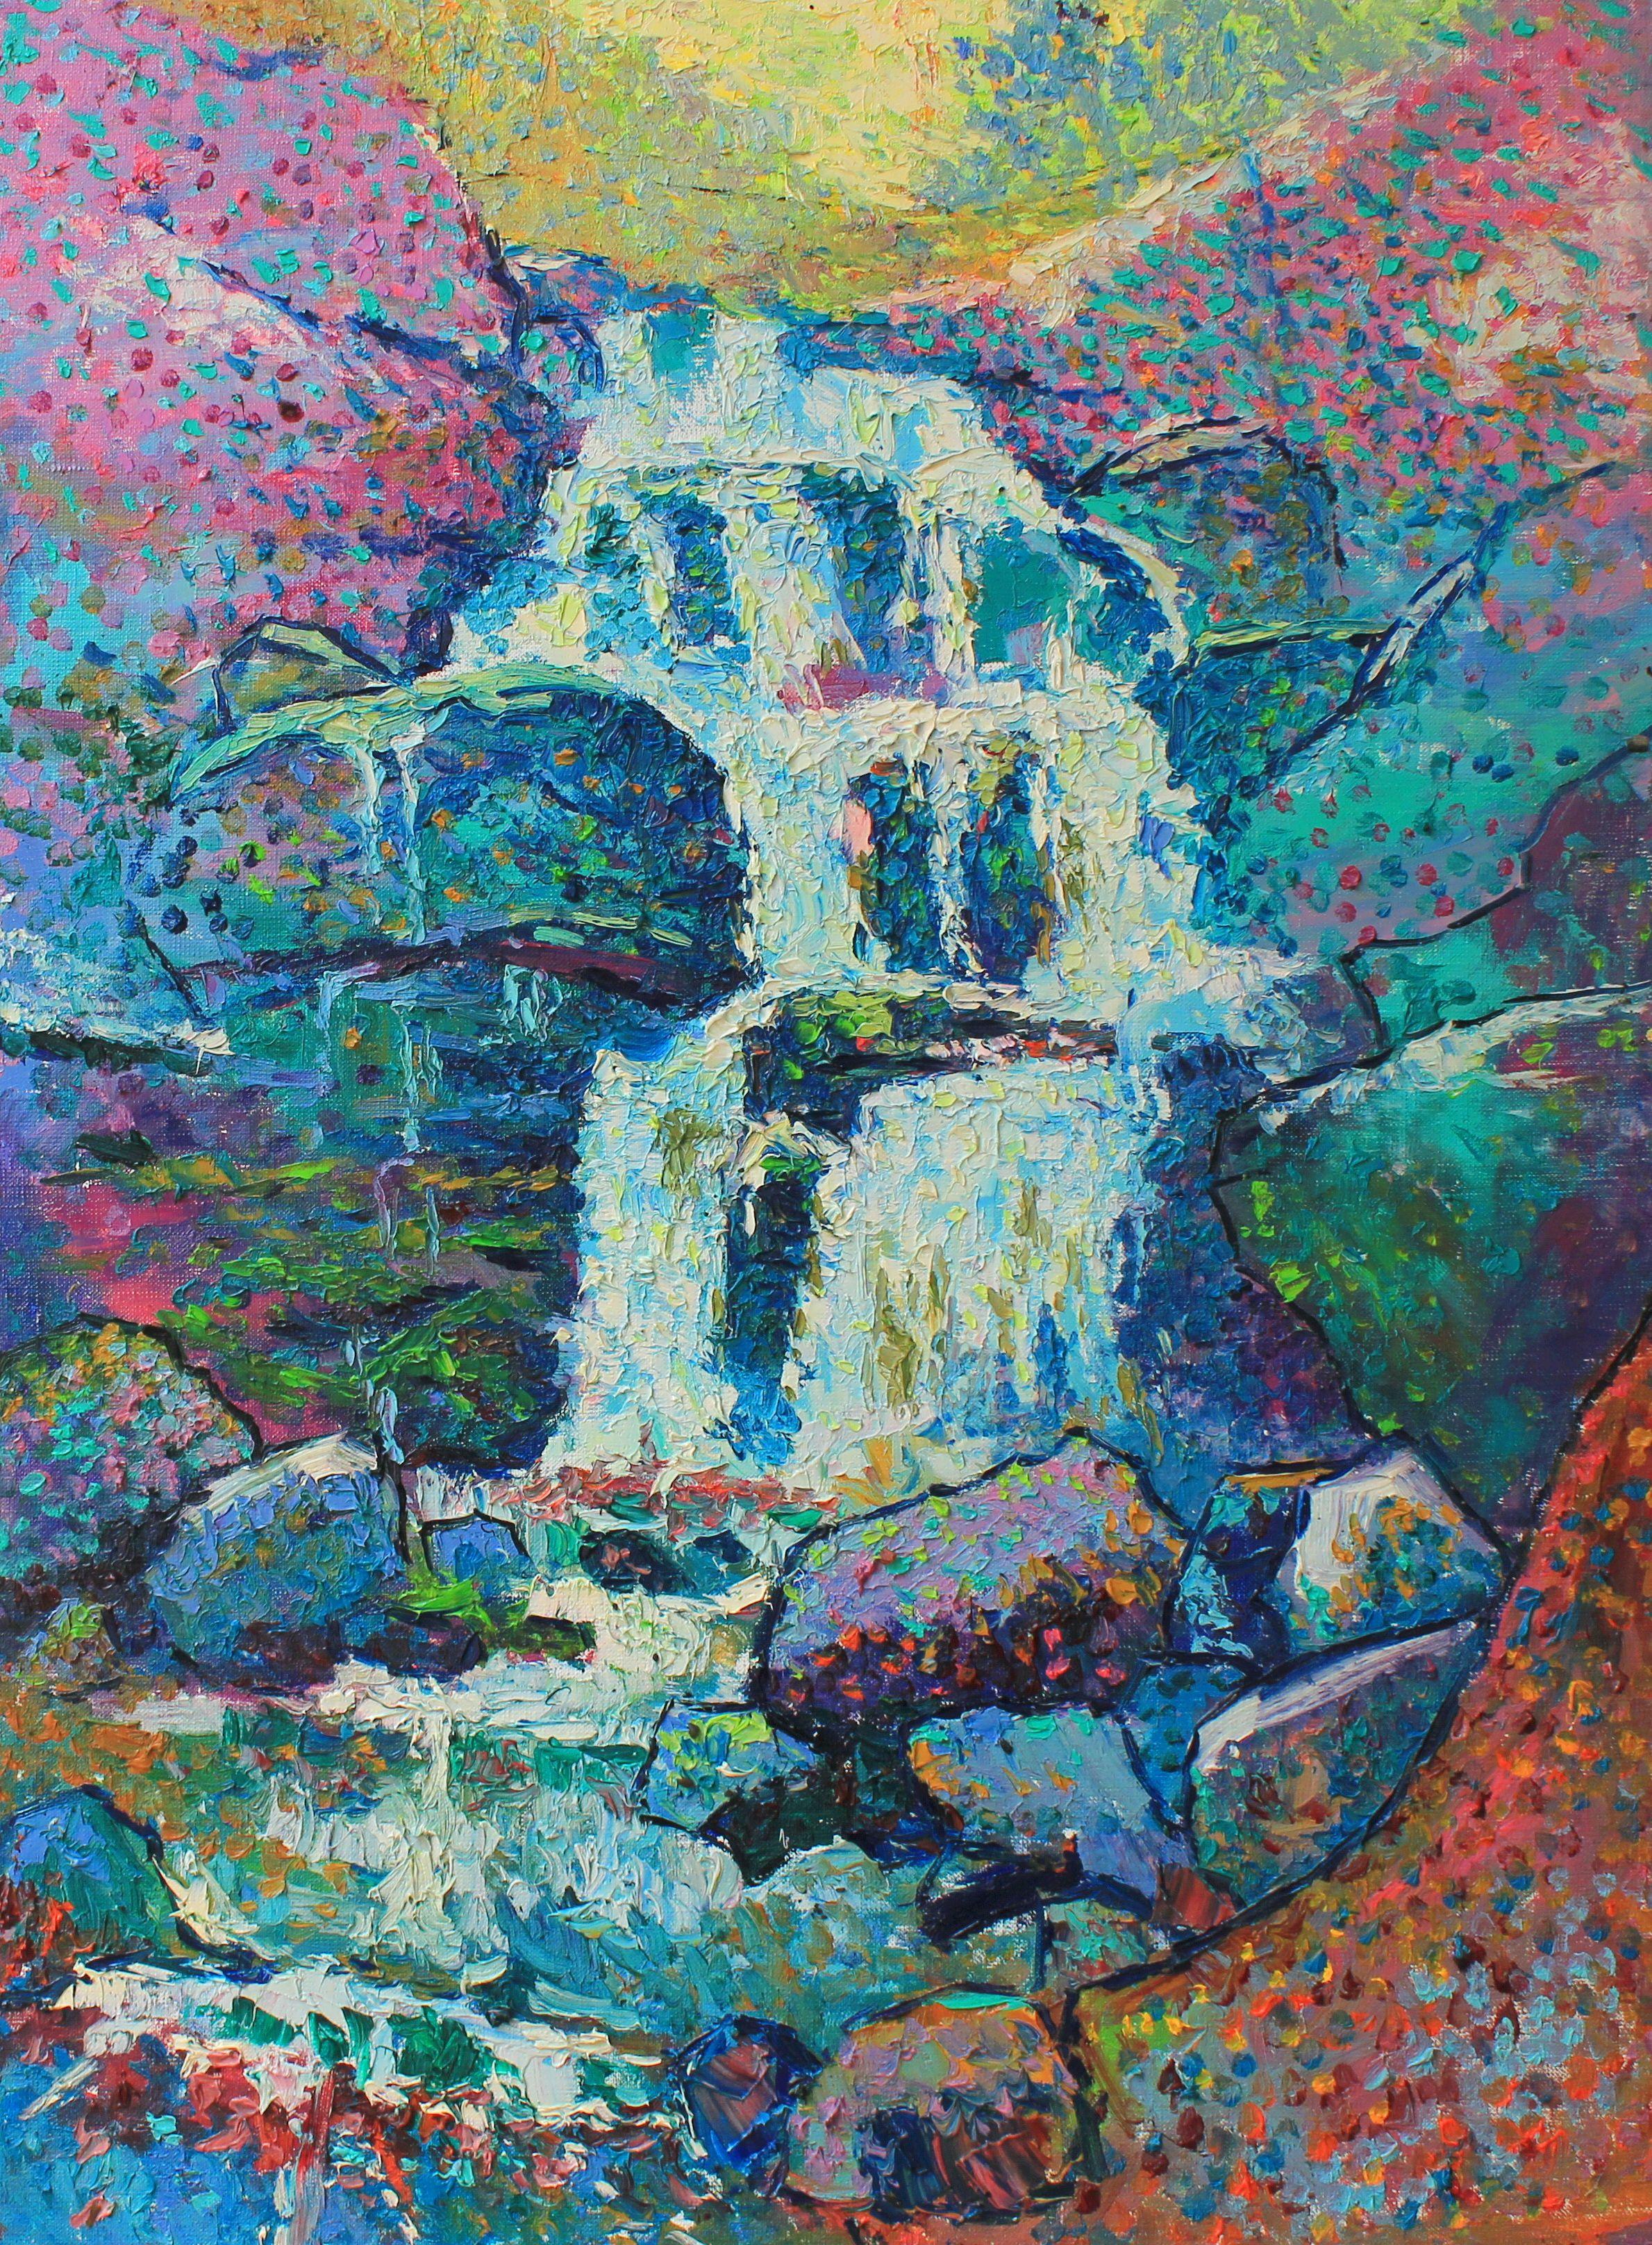 Original Oil painting by Ukrainian artist Evgeny Chernyakovsky    " Waterfall"  60.0 X 80.0 CM / 23.6 X 31.4 IN  HIGH QUALITY oil on canvas  Signed on the front and back  Dated 2020  Good condition  GUARANTEE OF AUTHENTICITY :: Painting ::